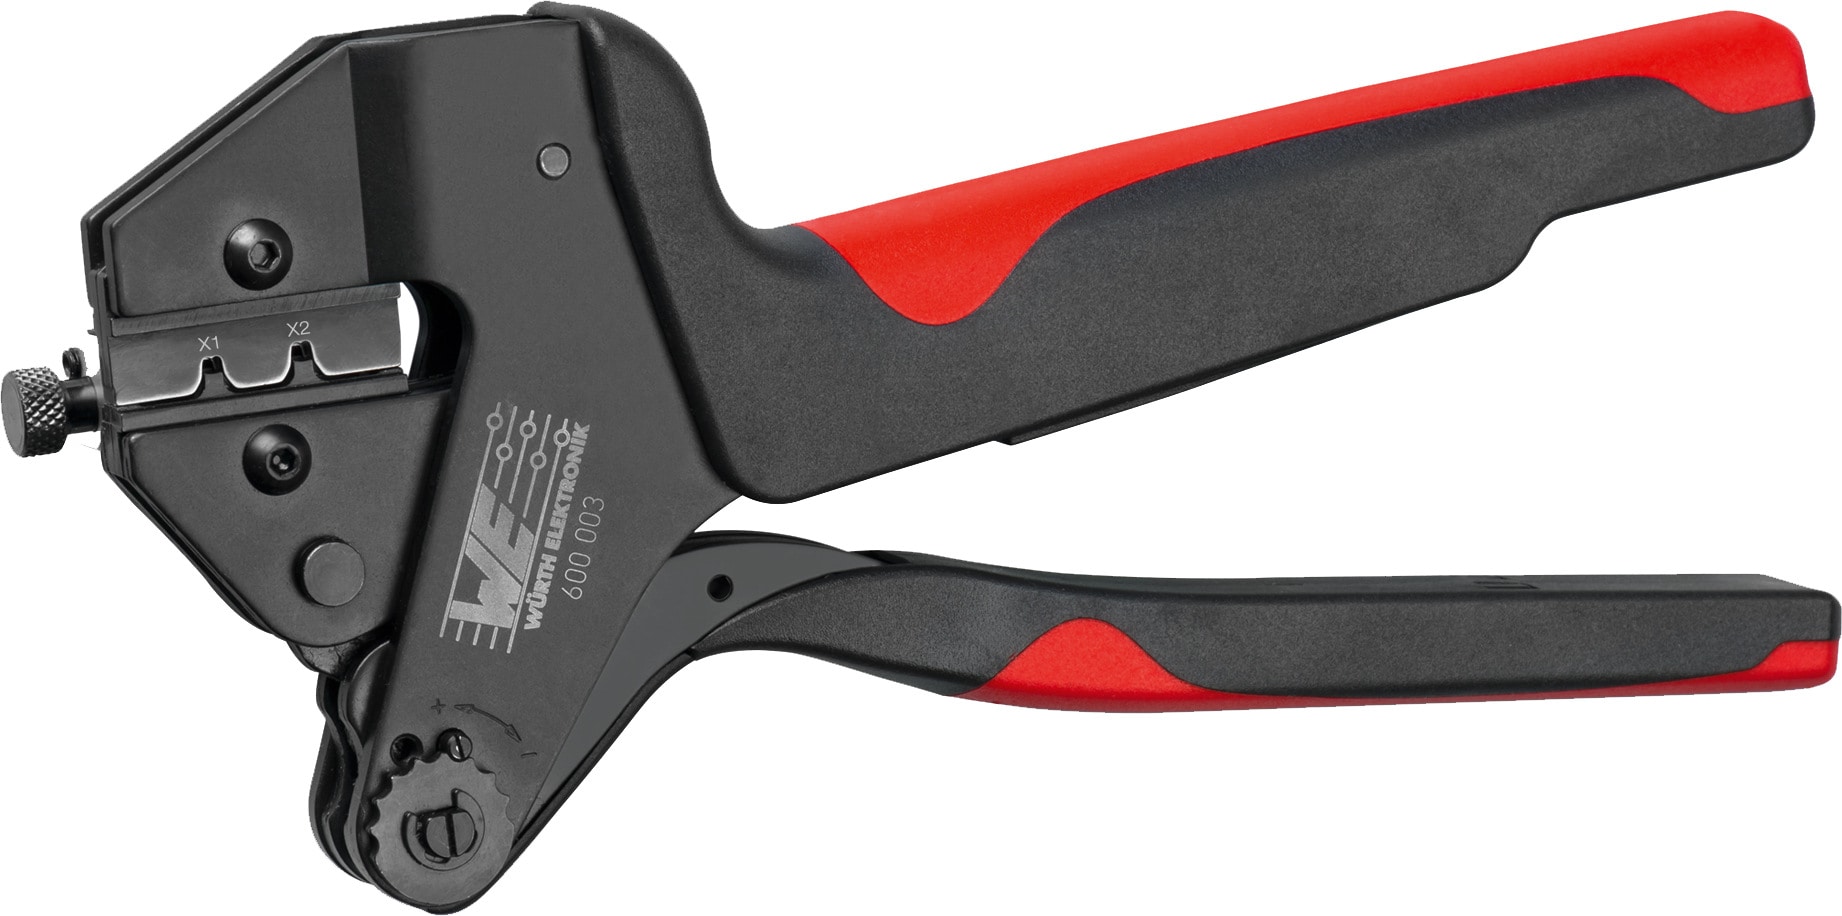 Manual Crimping Tool for WR-DSUB, Electromechanical Components